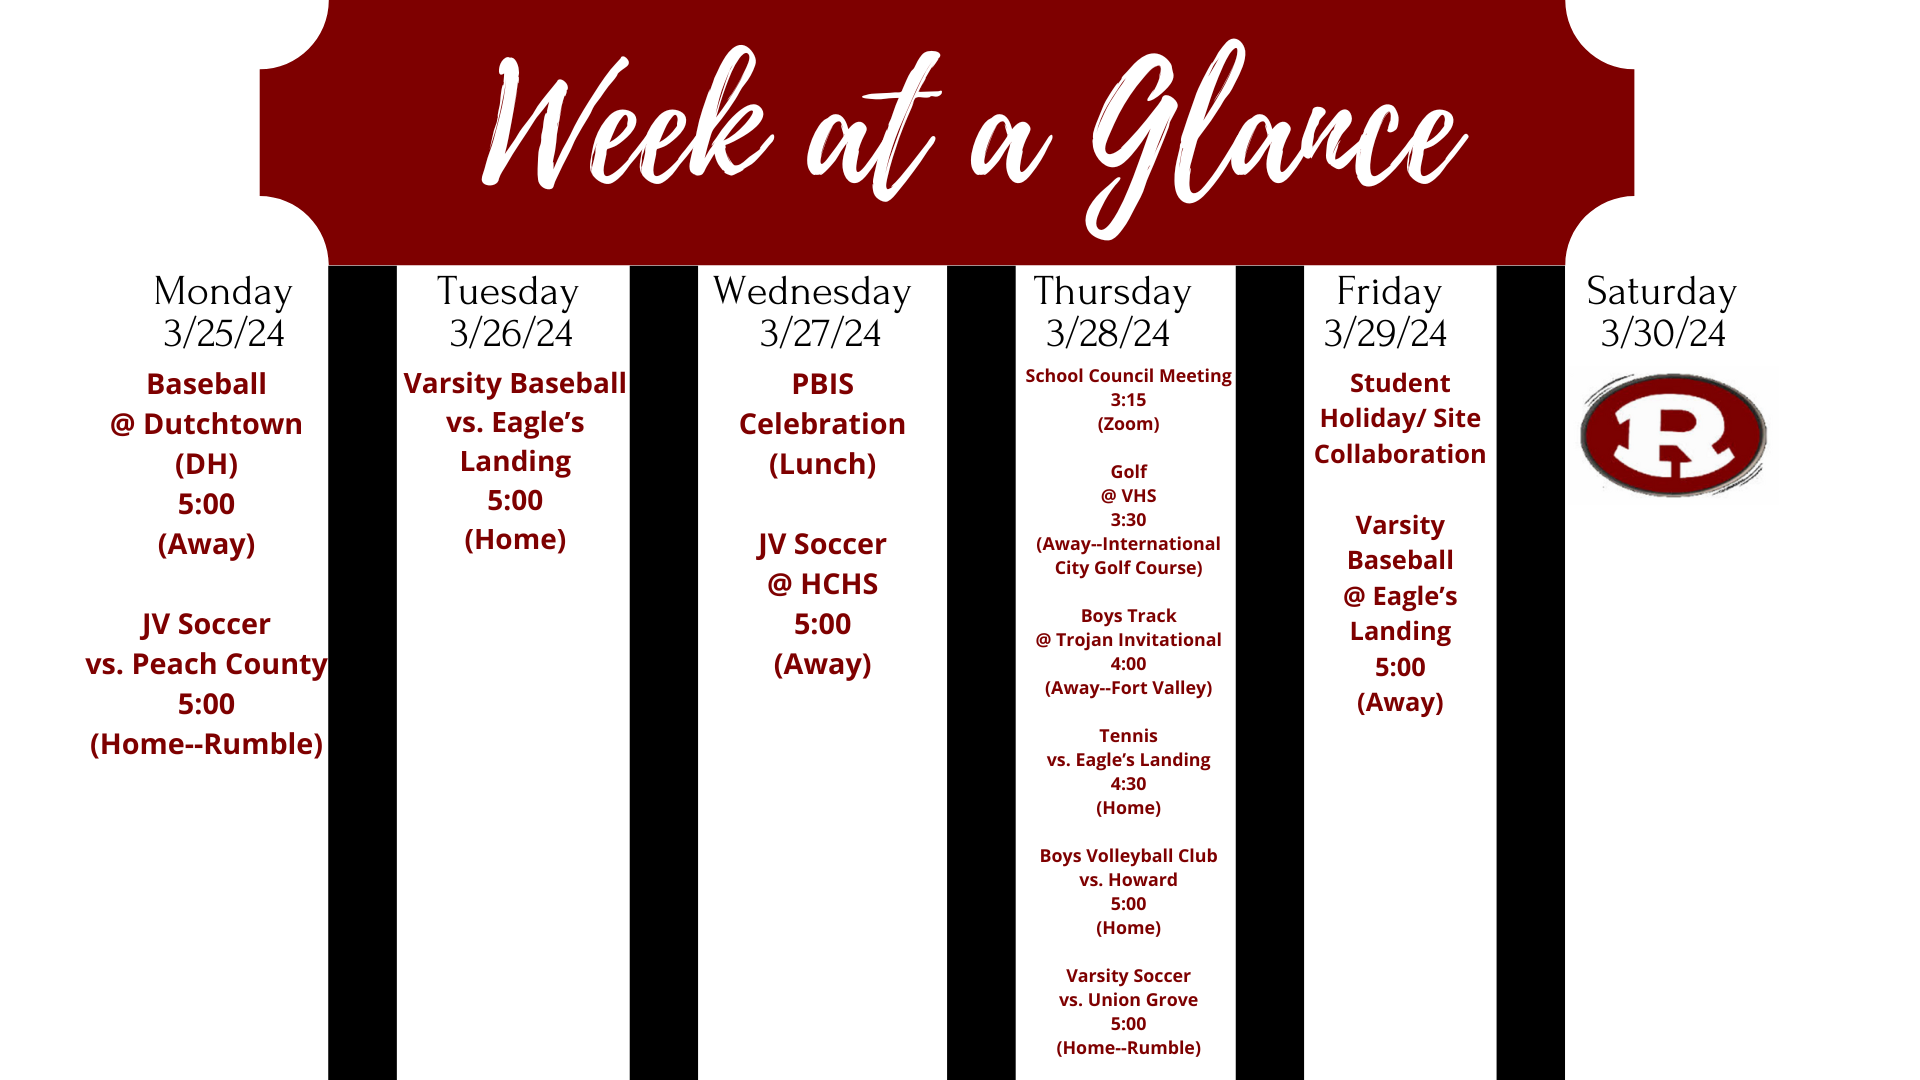 Week at a Glance March 25-March 30